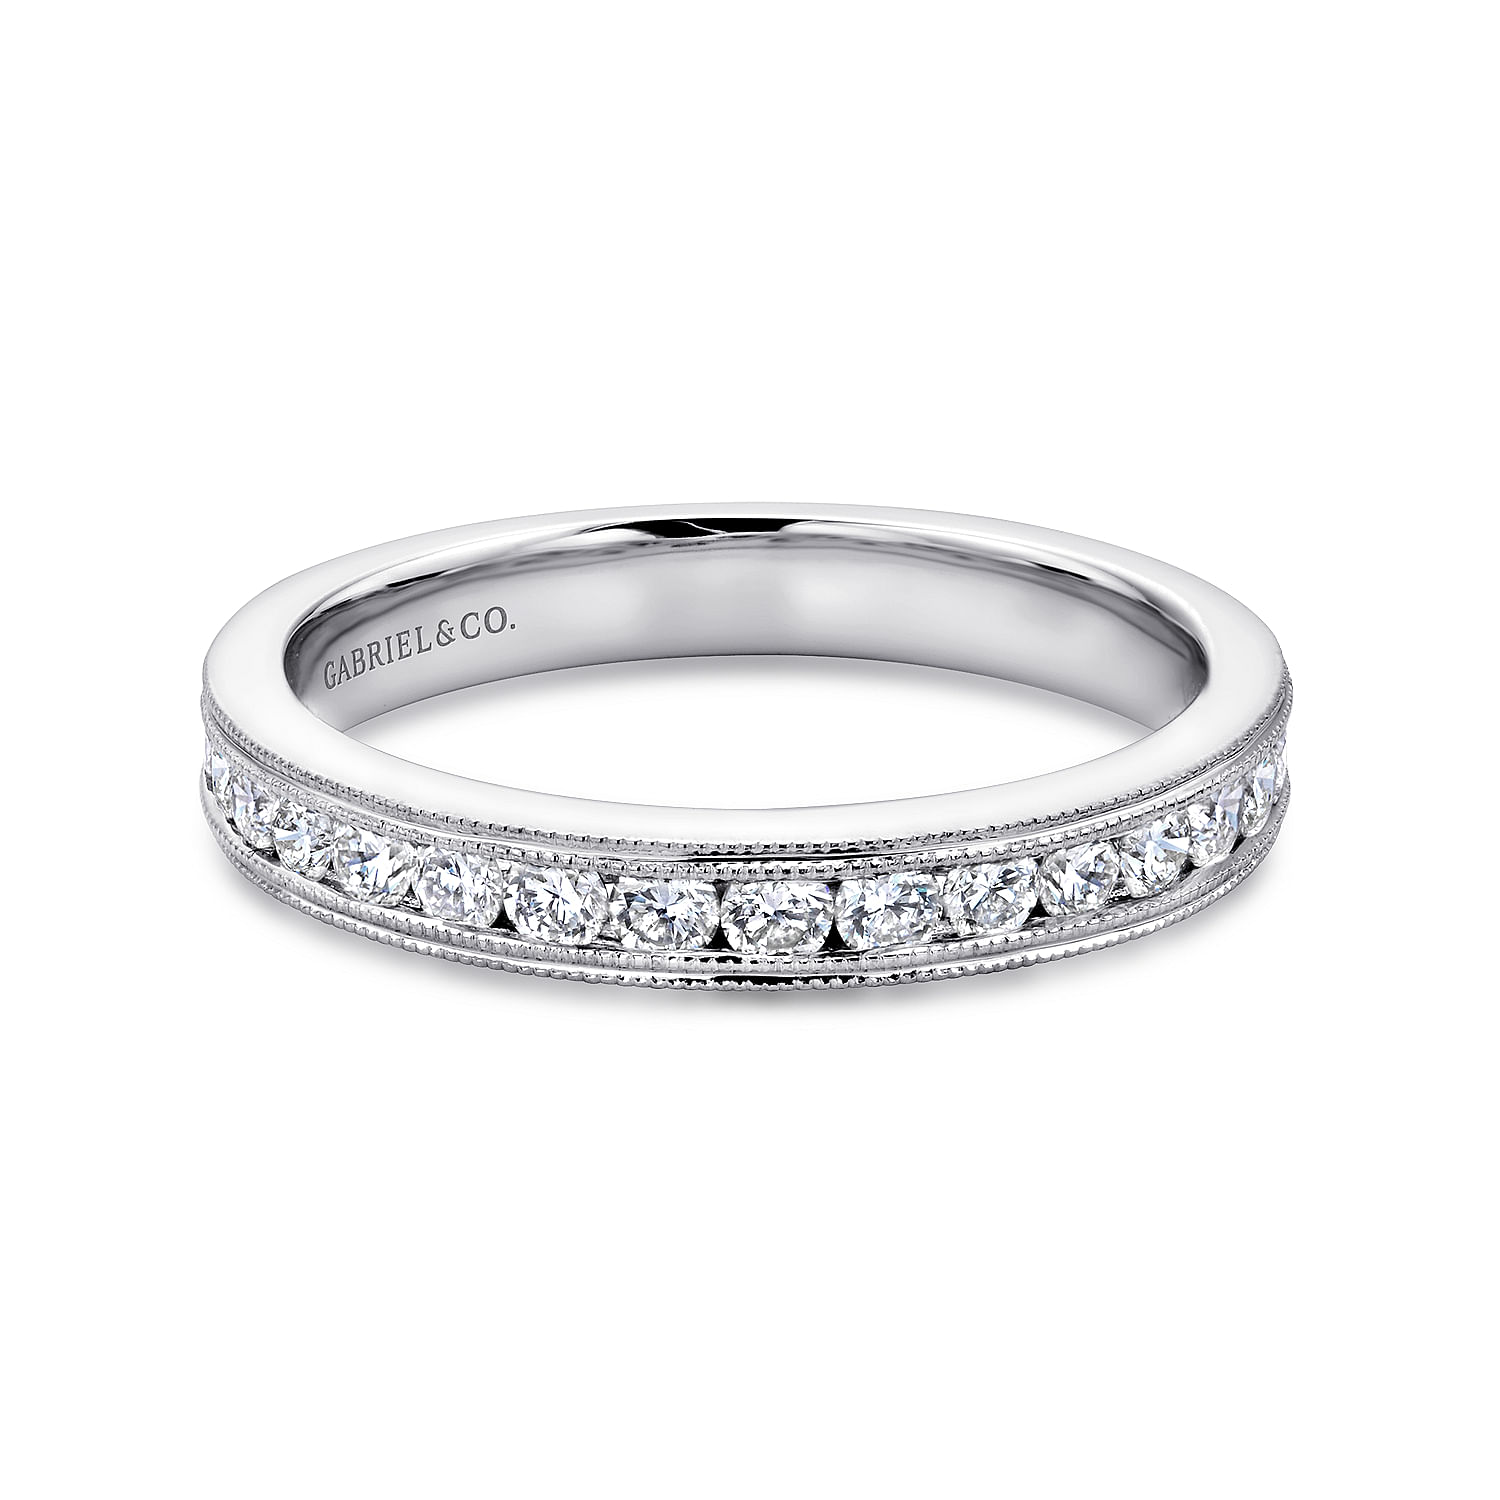 Macao - Vintage Inspired 14K White Gold Channel Set Diamond Anniversary Band